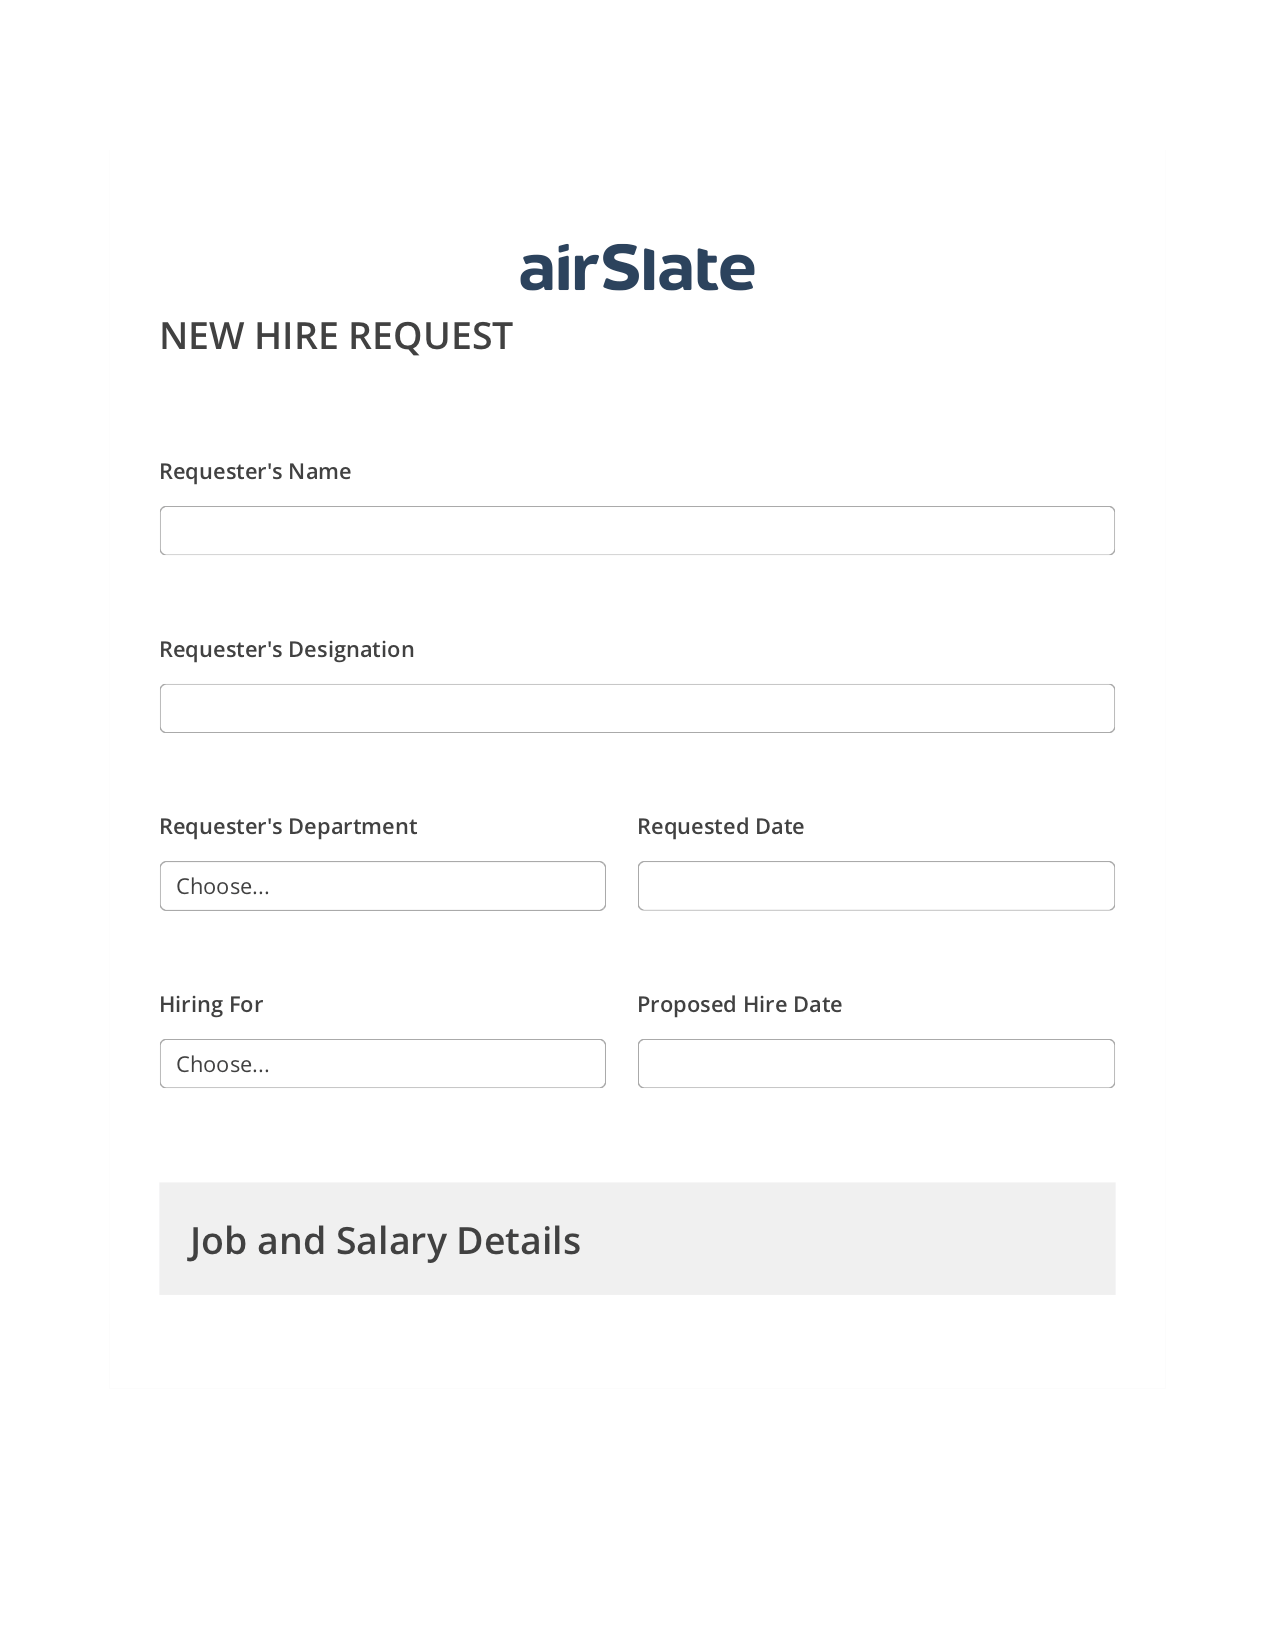 Hiring Request Workflow Pre-fill from Excel Spreadsheet Bot, Create NetSuite Record bot, Archive to OneDrive Bot